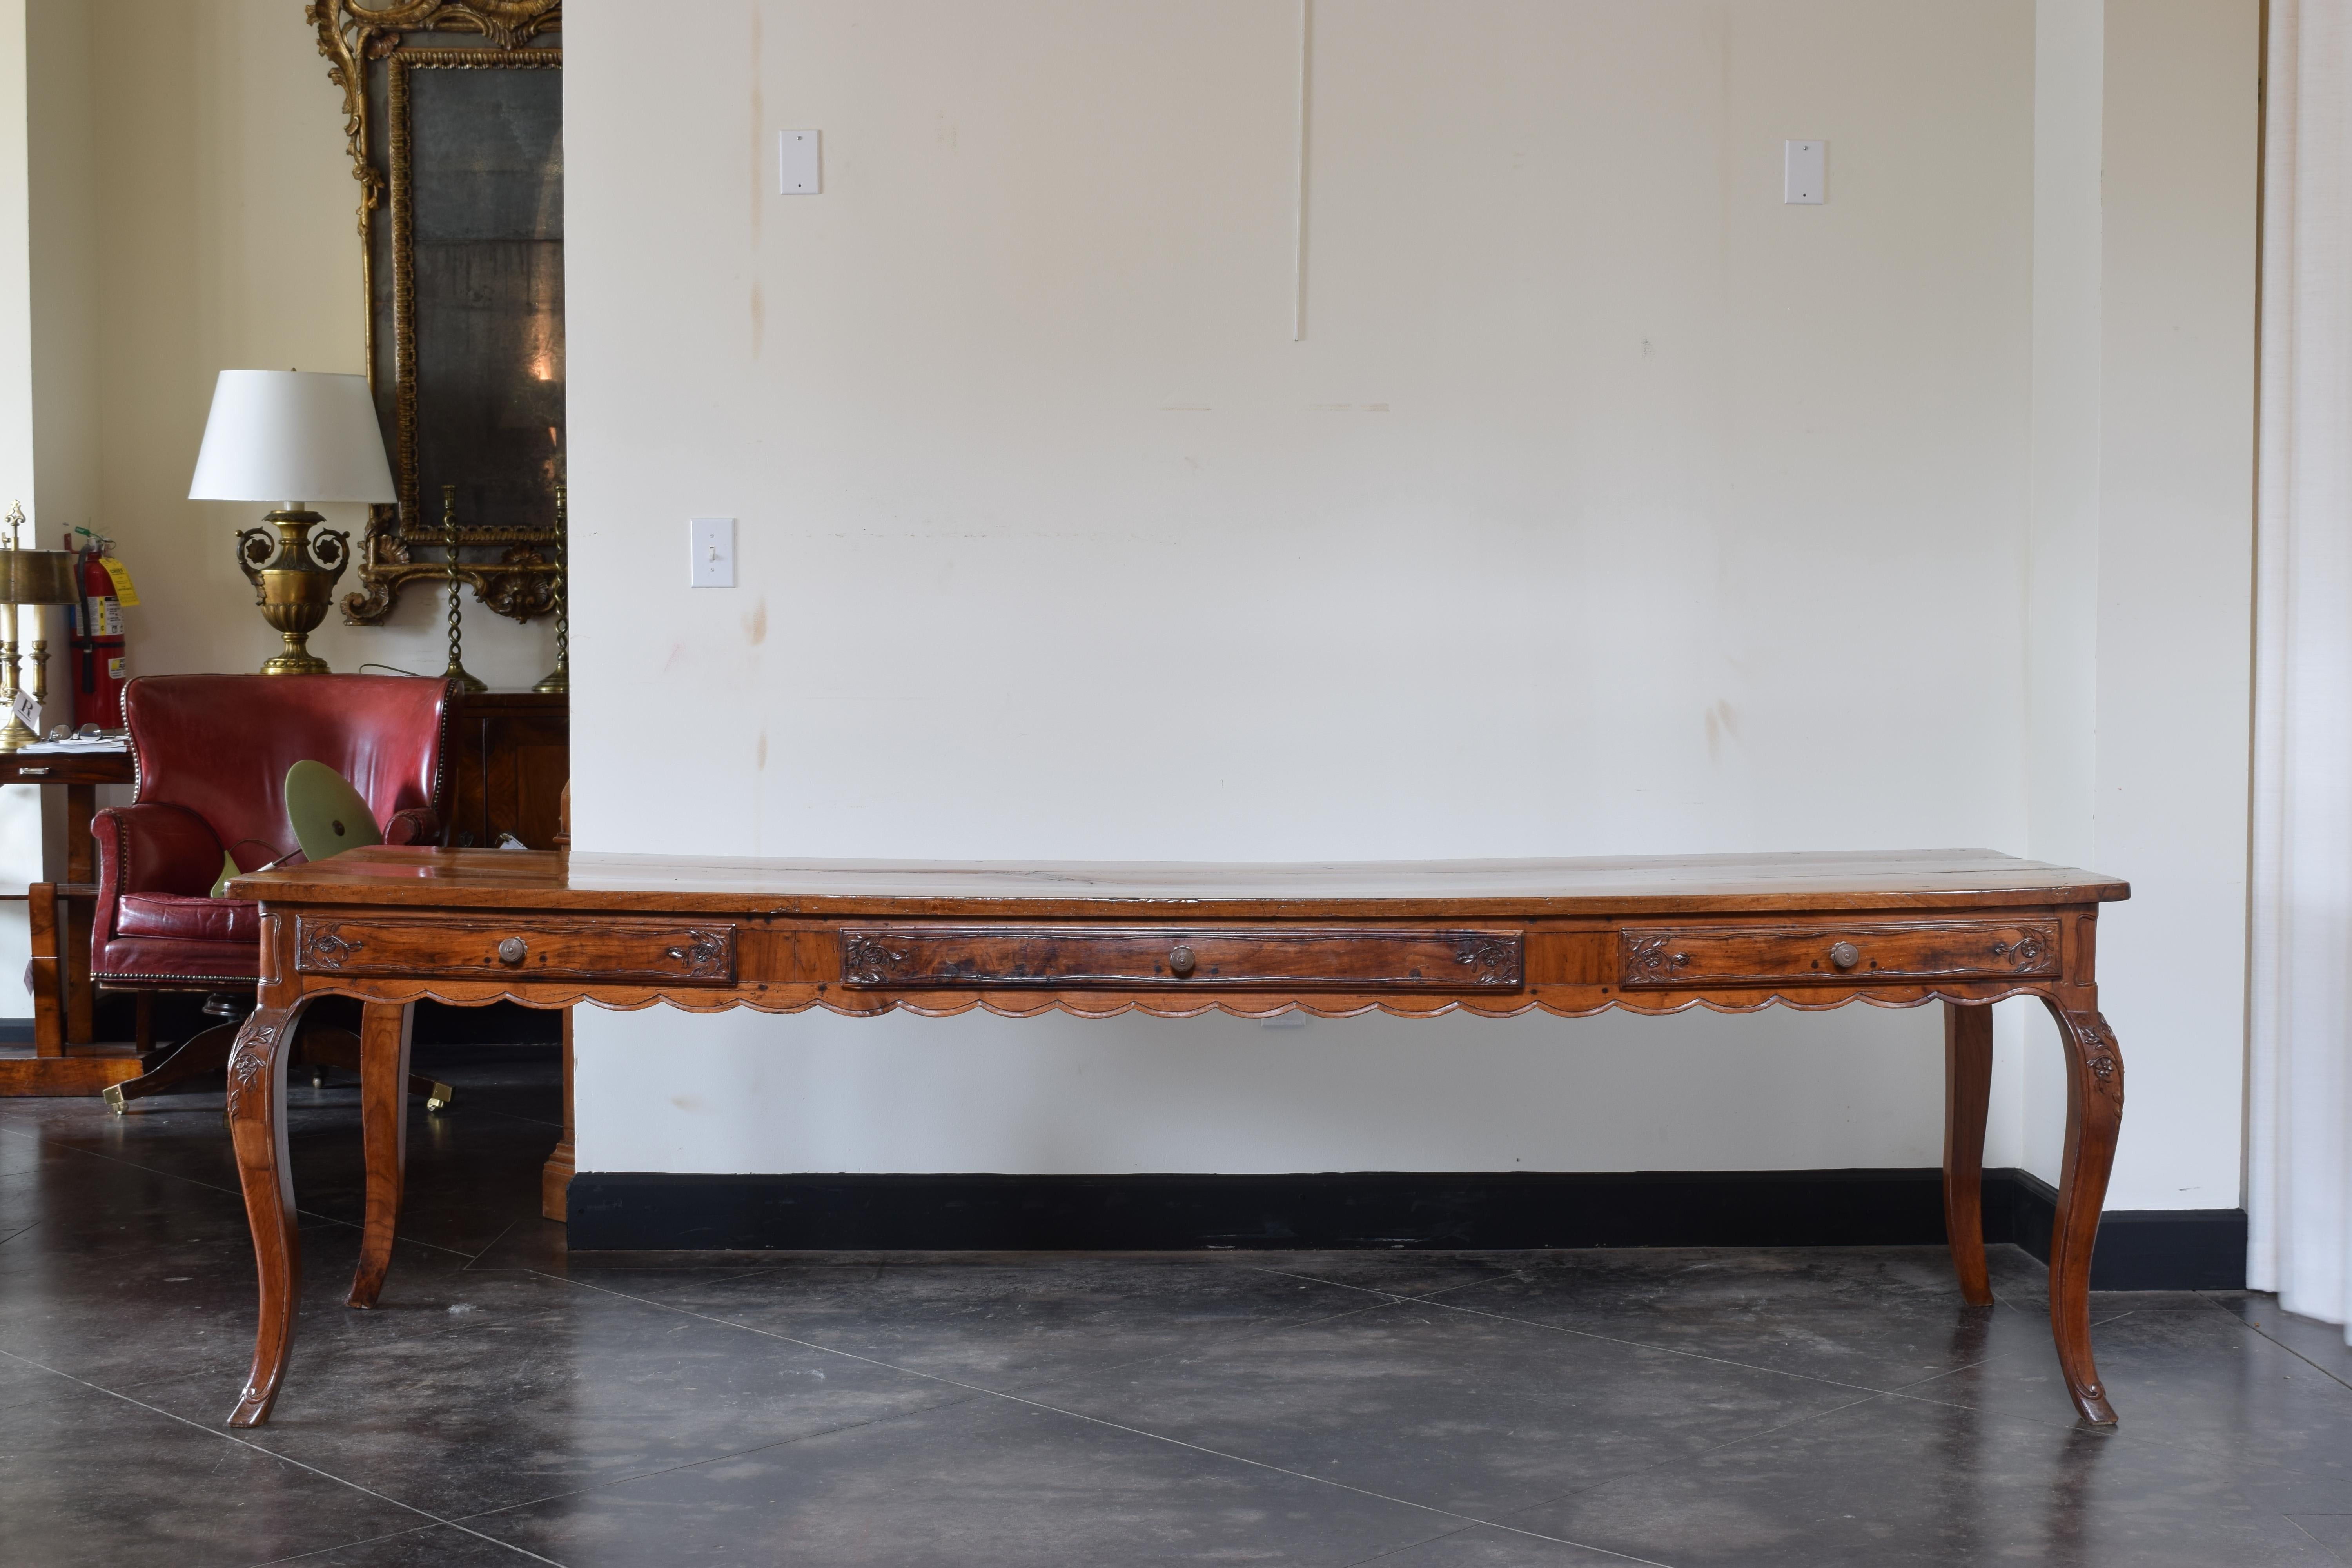 French, Louis XV Period, Carved Walnut 3-Drawer Kitchen/Center Table, mid 18thc In Good Condition For Sale In Atlanta, GA